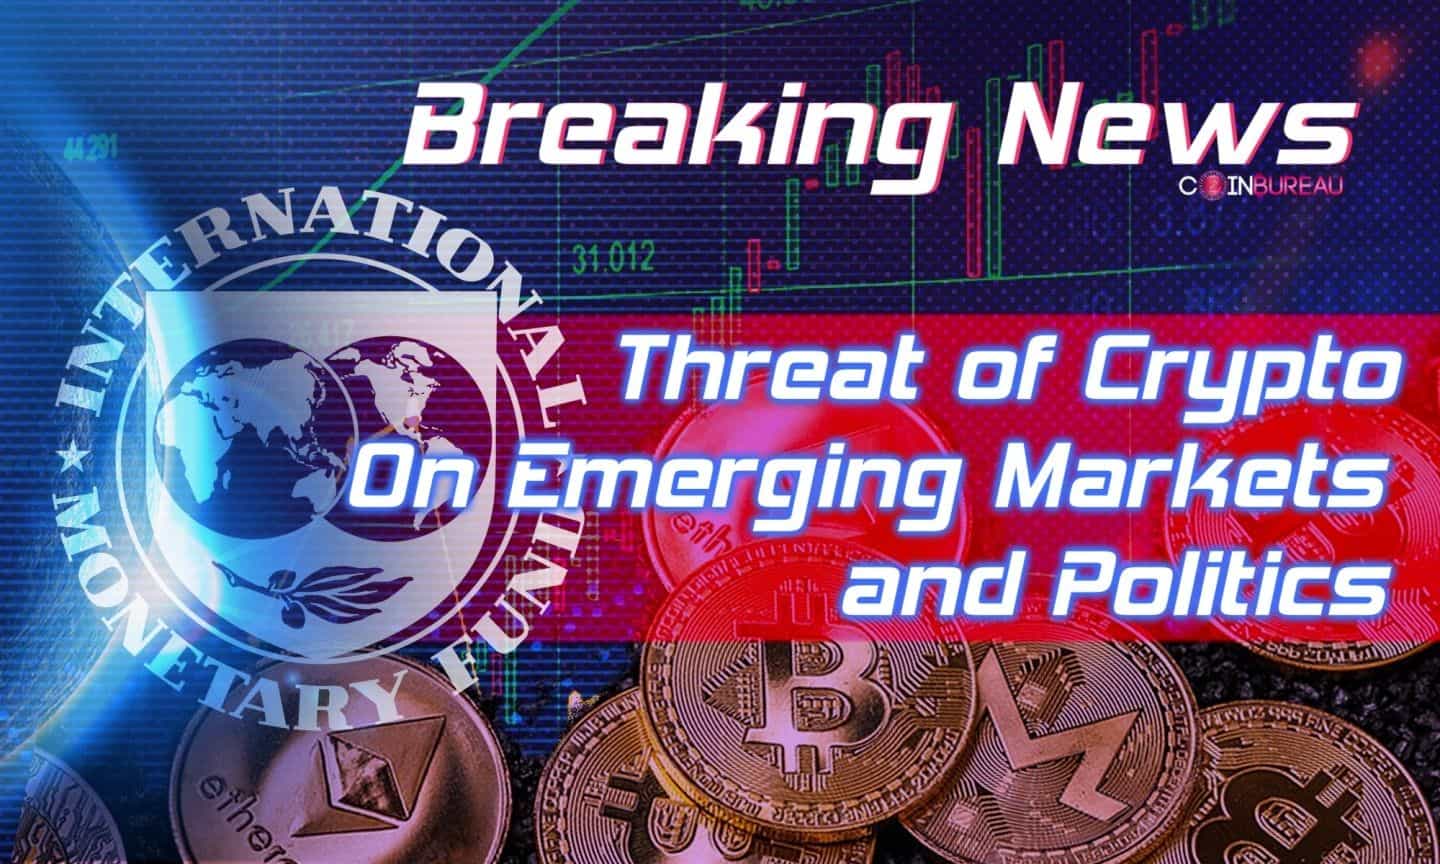 IMF Report Highlights Threat of Crypto On Emerging Markets and Politics